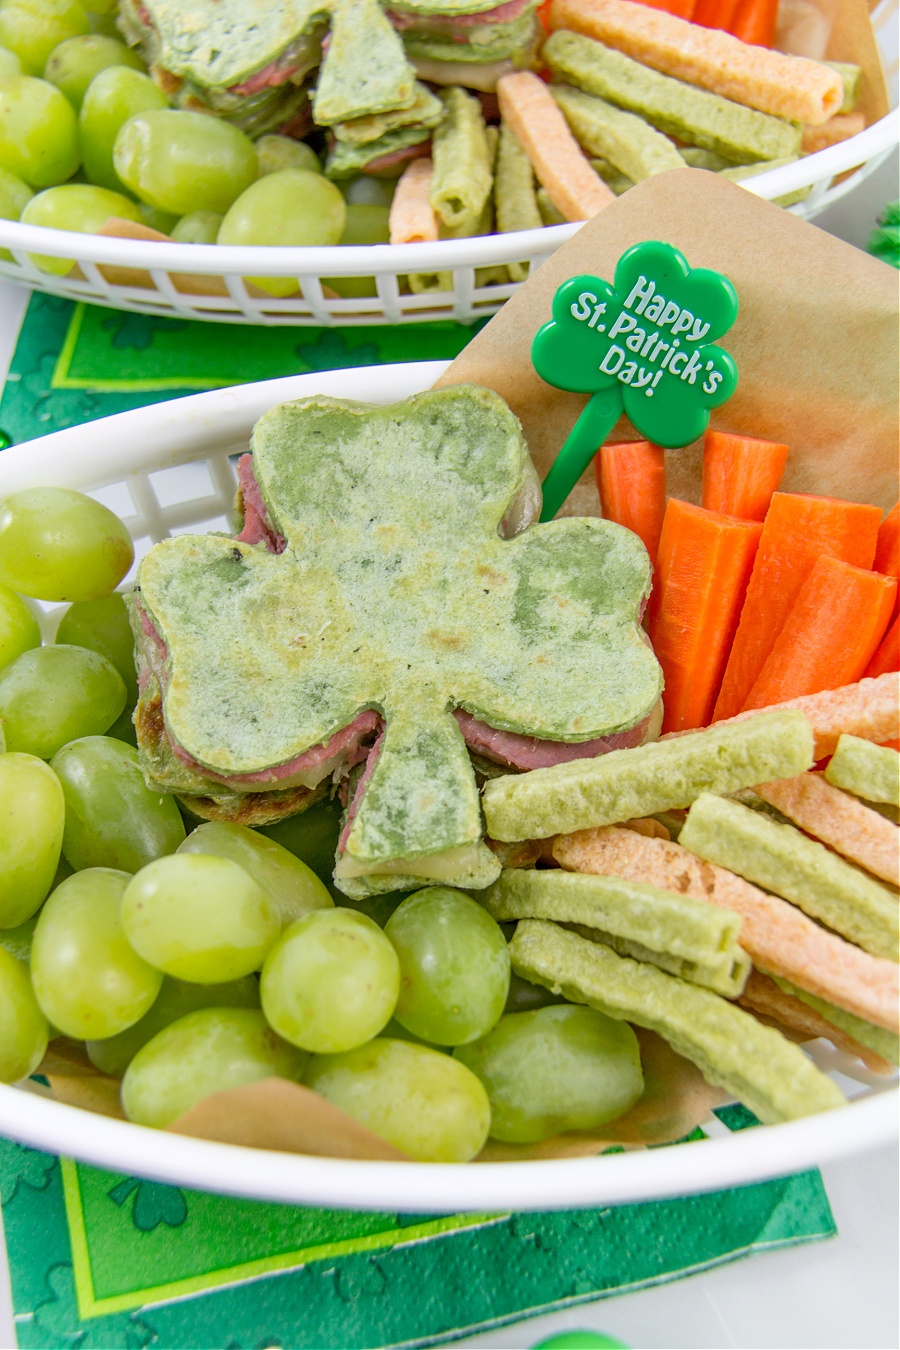 st patricks day food tray with a shamrock quesadilla with grapes, vegetable chips and carrot sticks